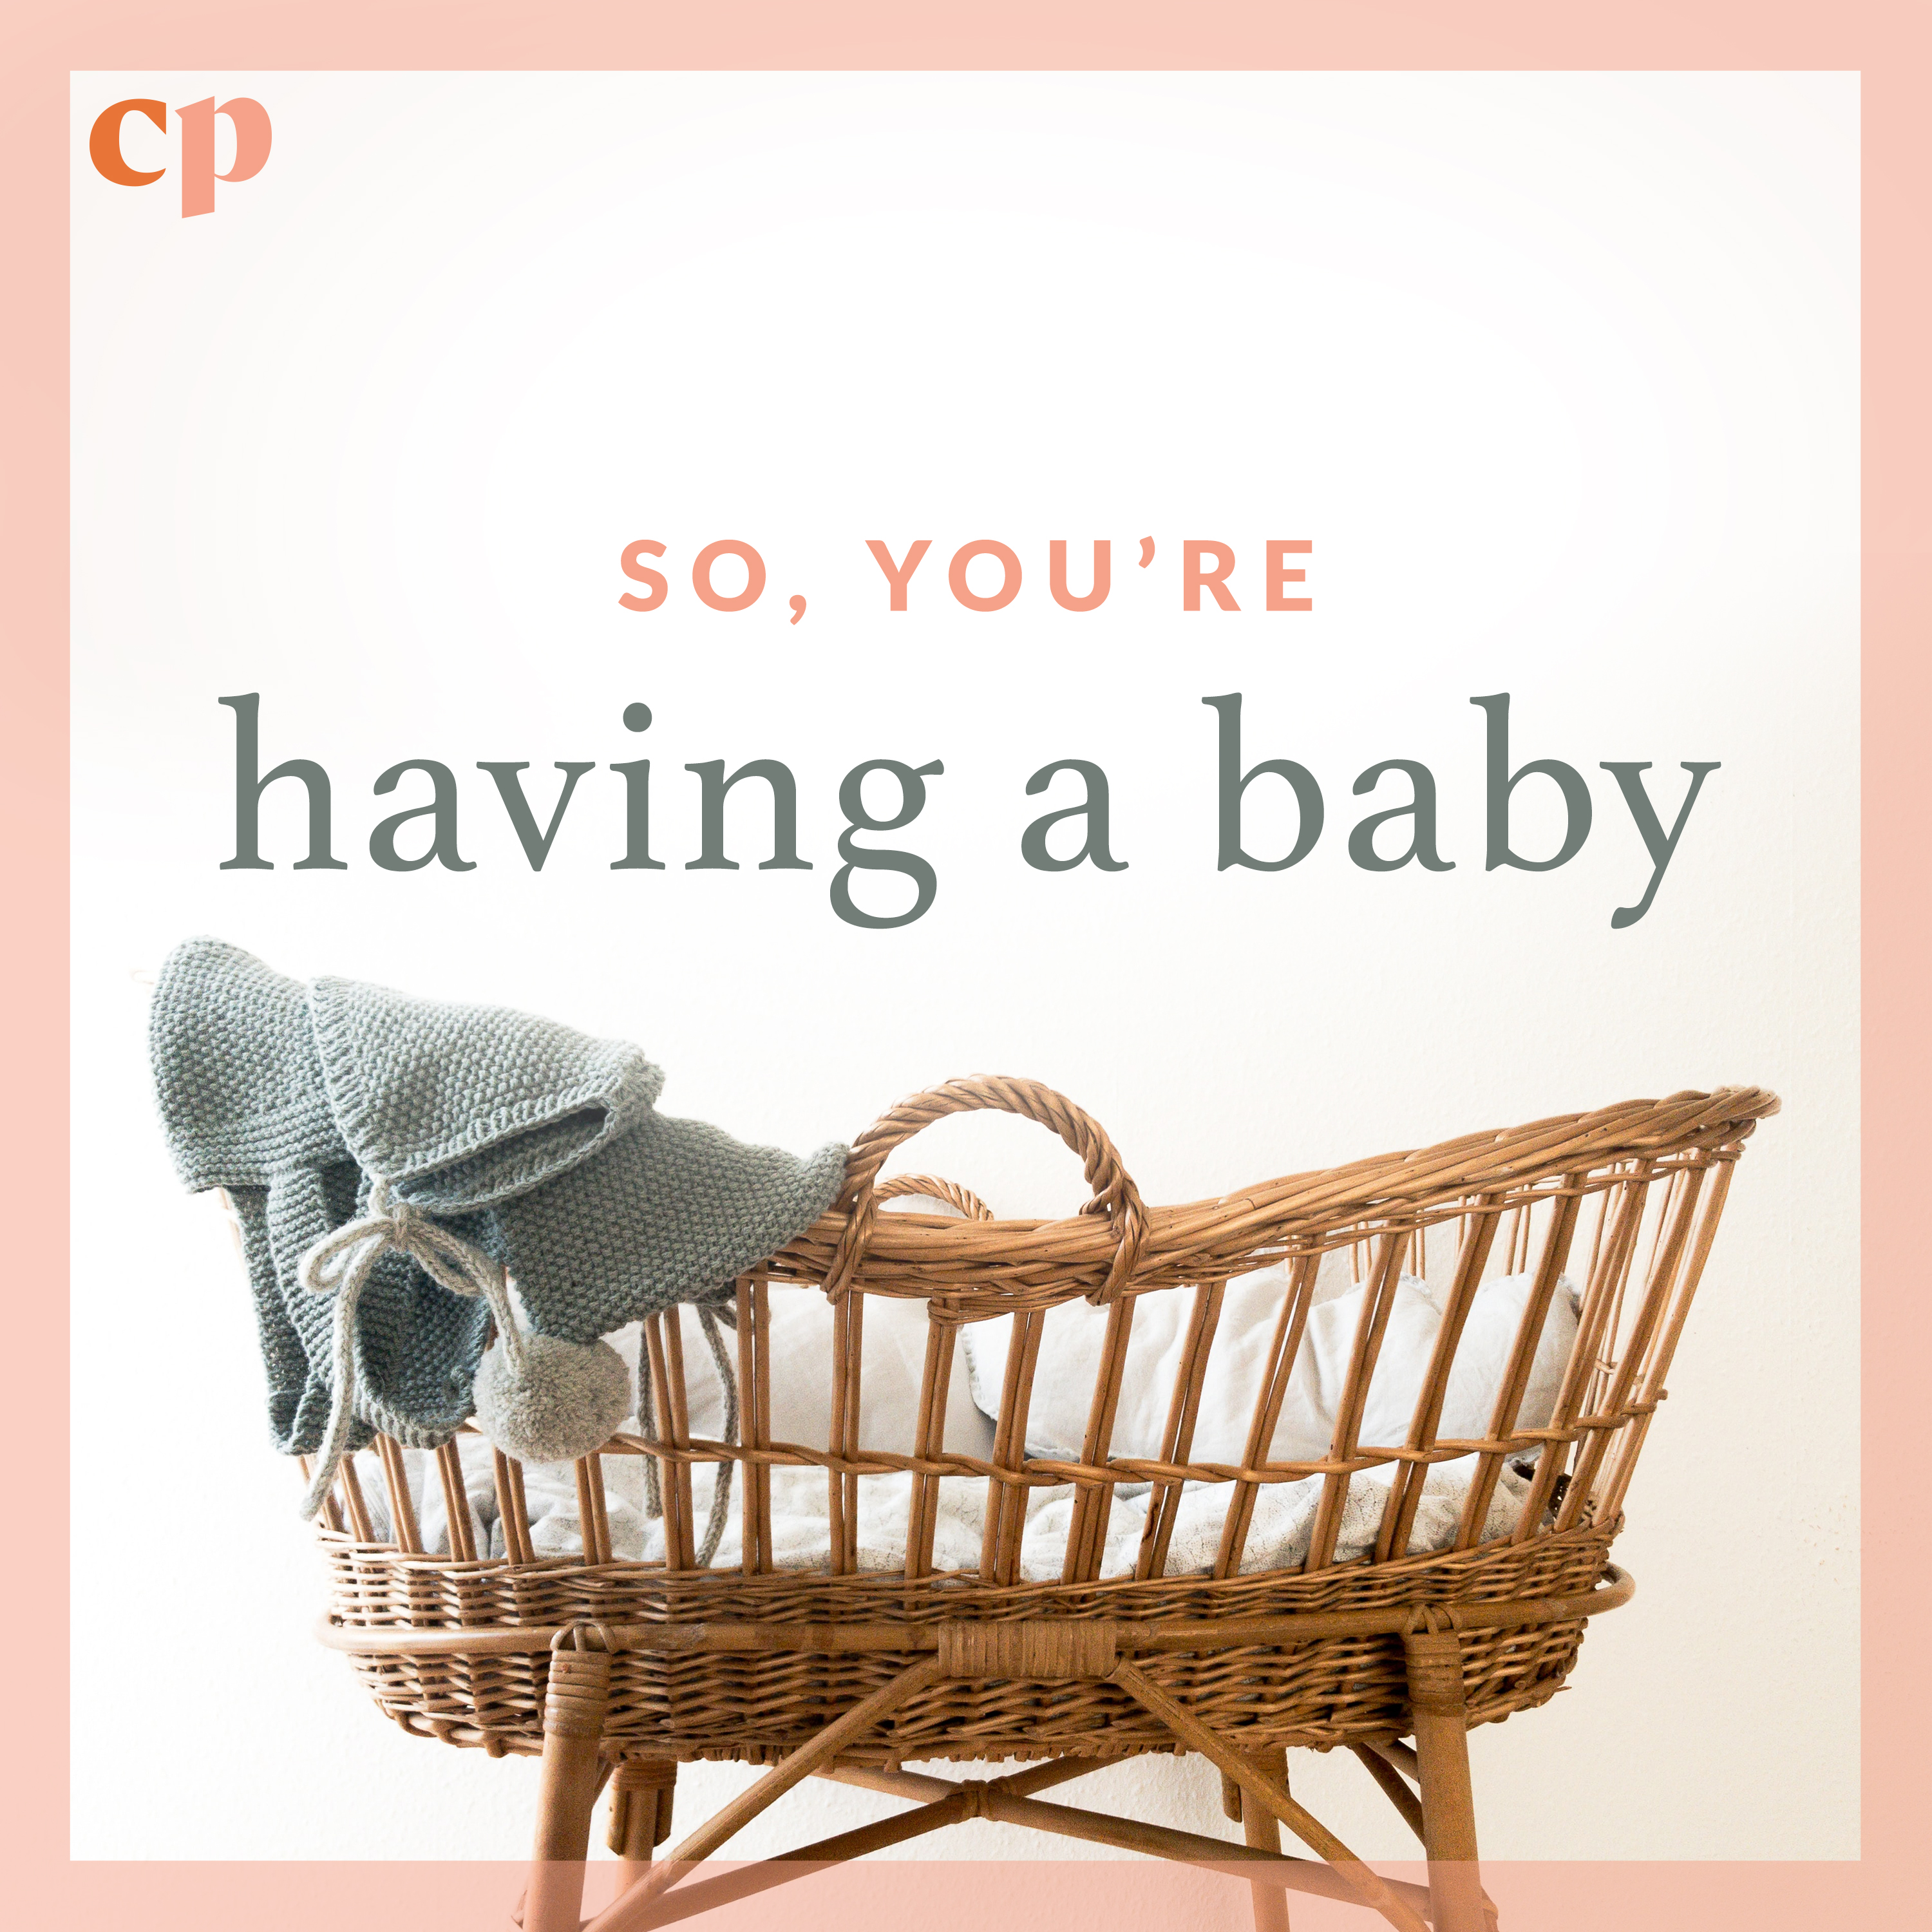 Ep. 8 - Self-care with a new baby